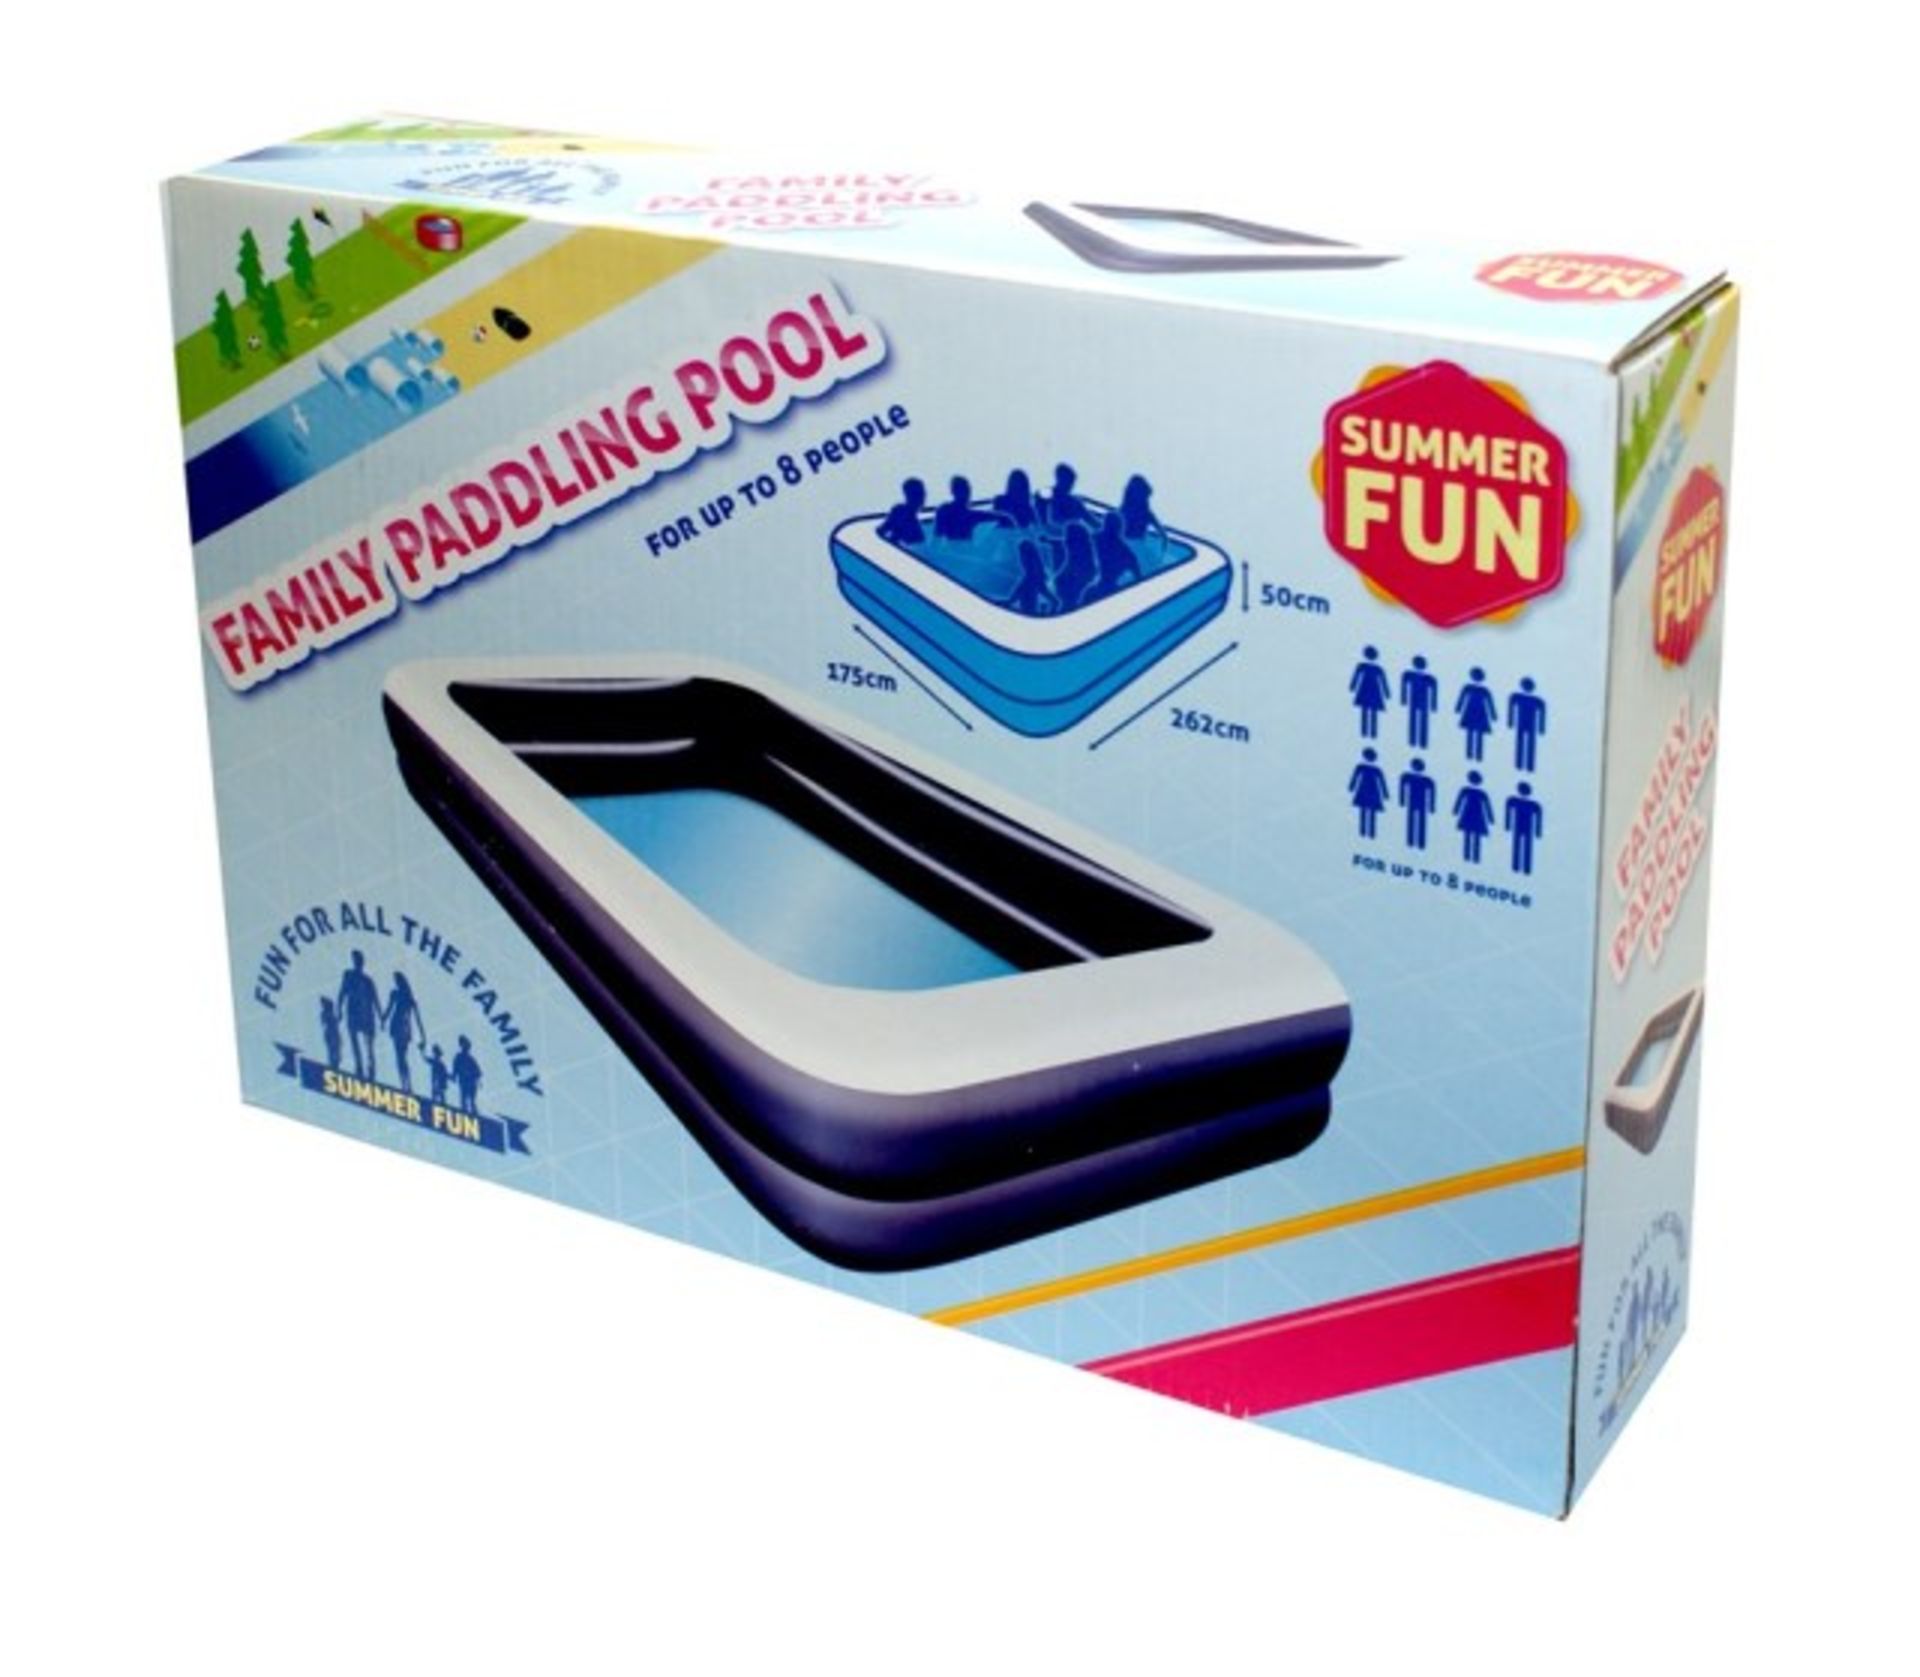 V *TRADE QTY* Brand New Family Paddling Pool 175x262x50cm X 10 YOUR BID PRICE TO BE MULTIPLIED BY - Image 2 of 2